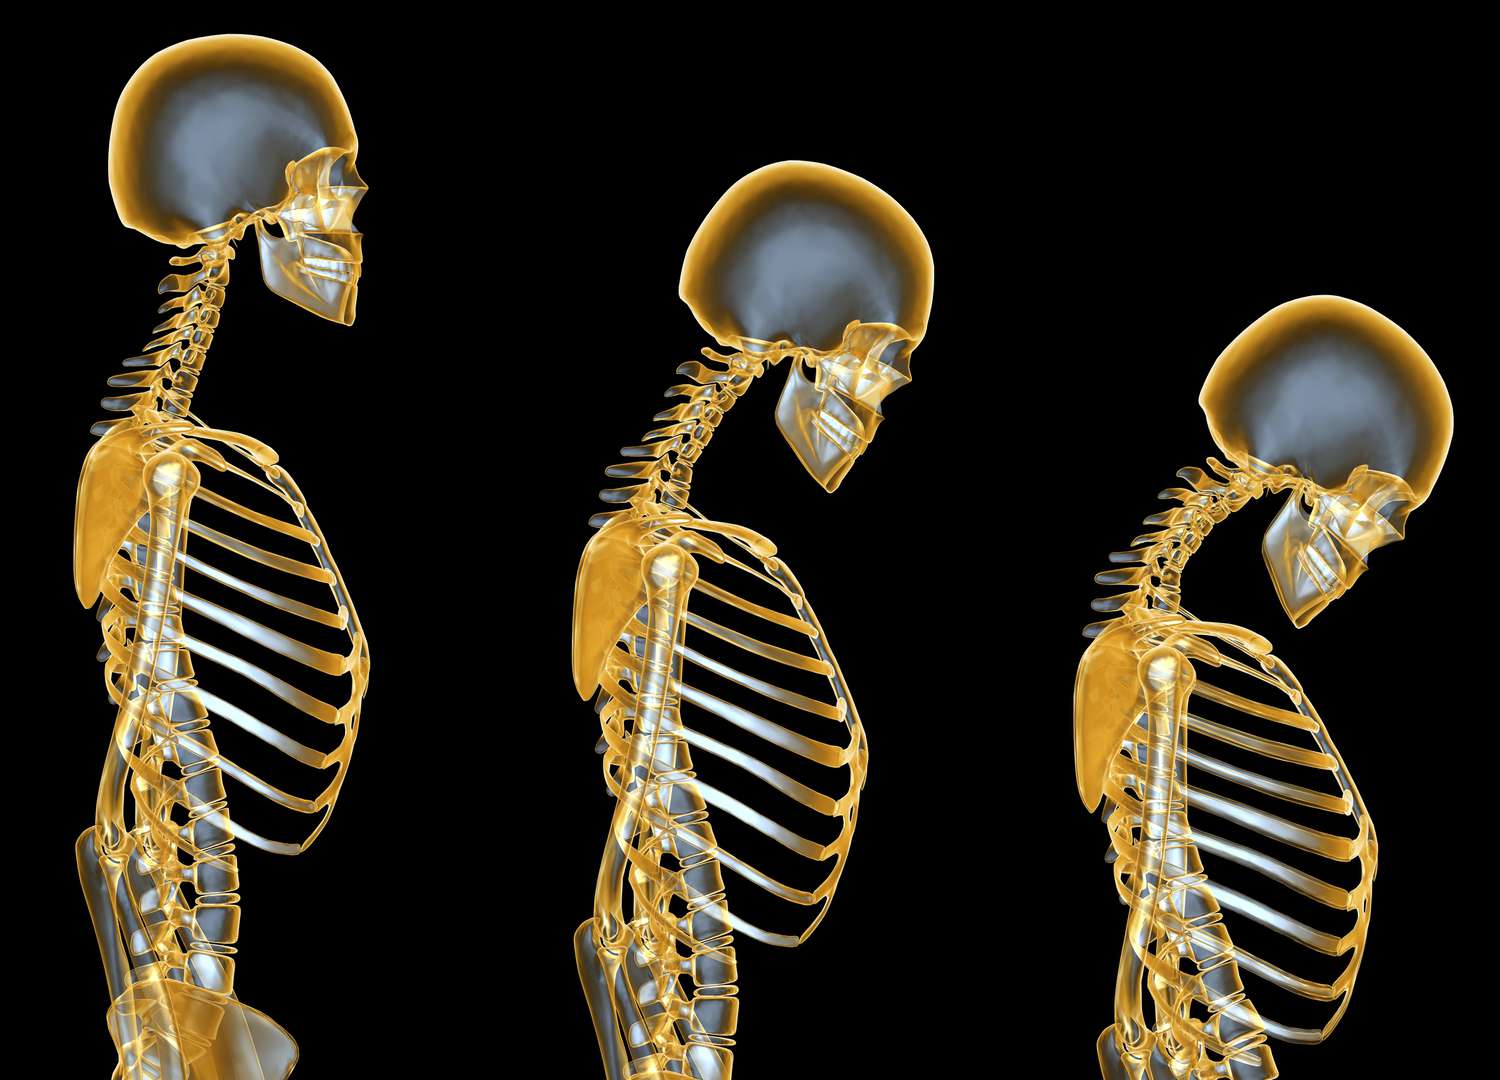 Fragile Bones: Osteoporosis and the Impact of Steroid Abuse